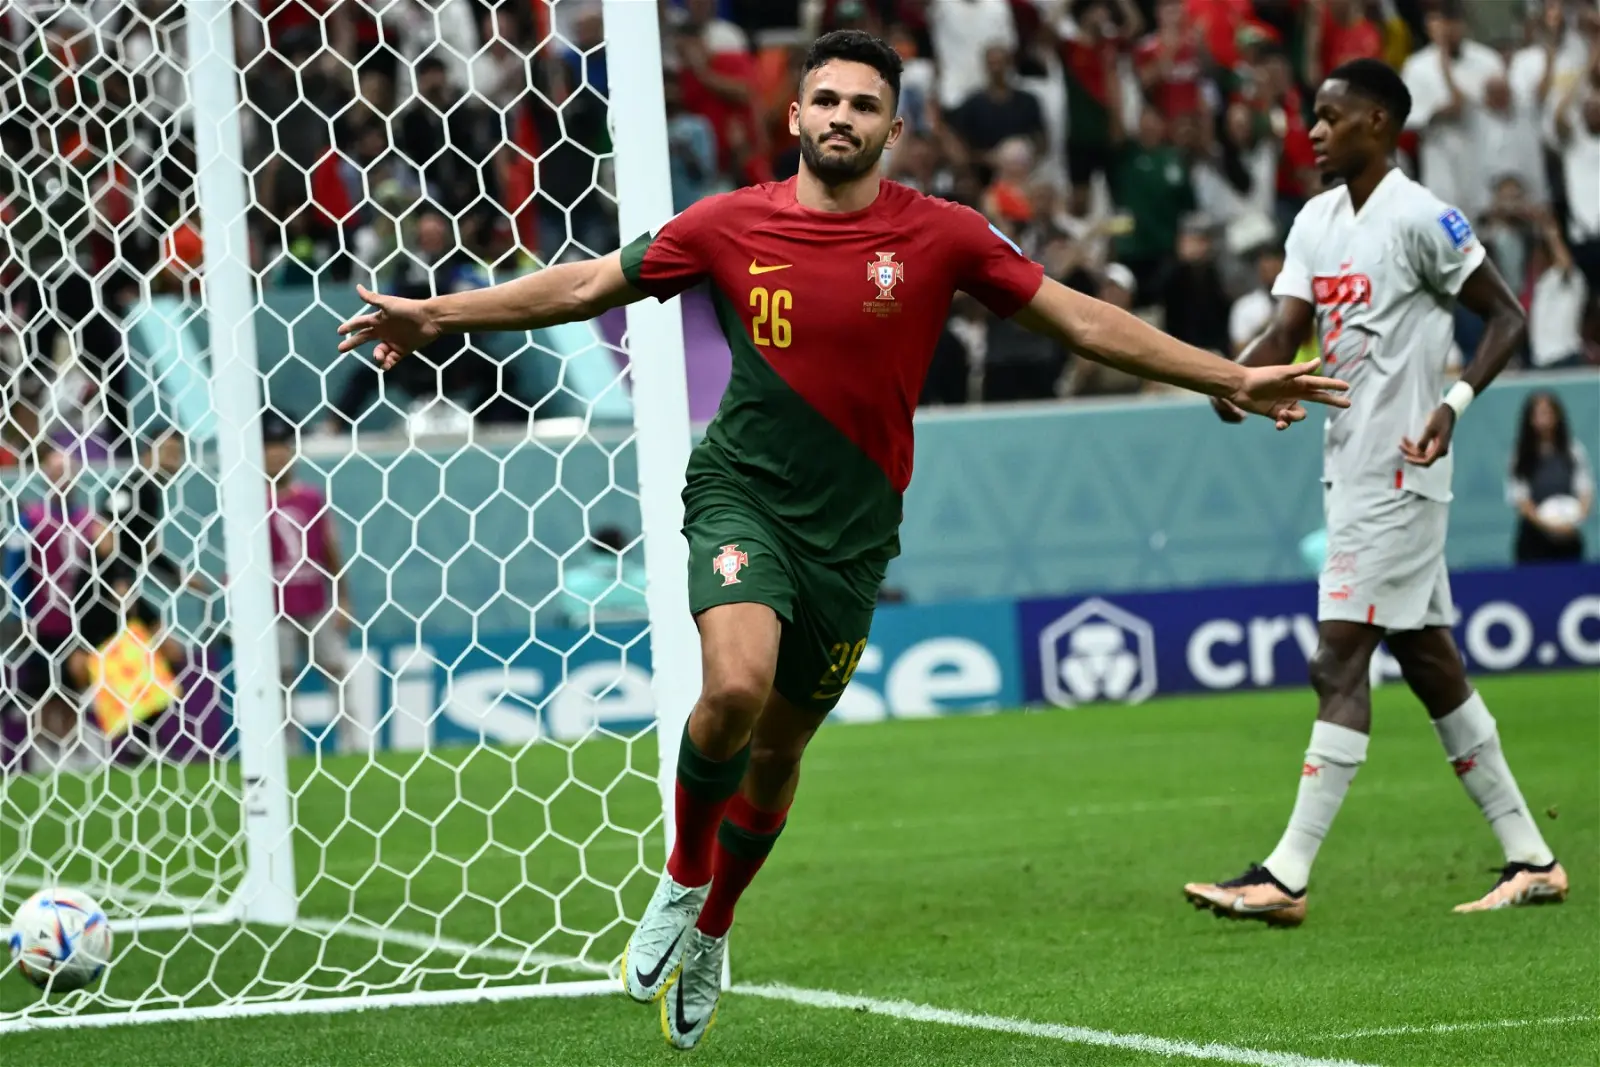 2022 World Cup: Ramos Grabs Hat-trick As Portugal Thrash Switzerland, Zoom Into Quarter-Finals